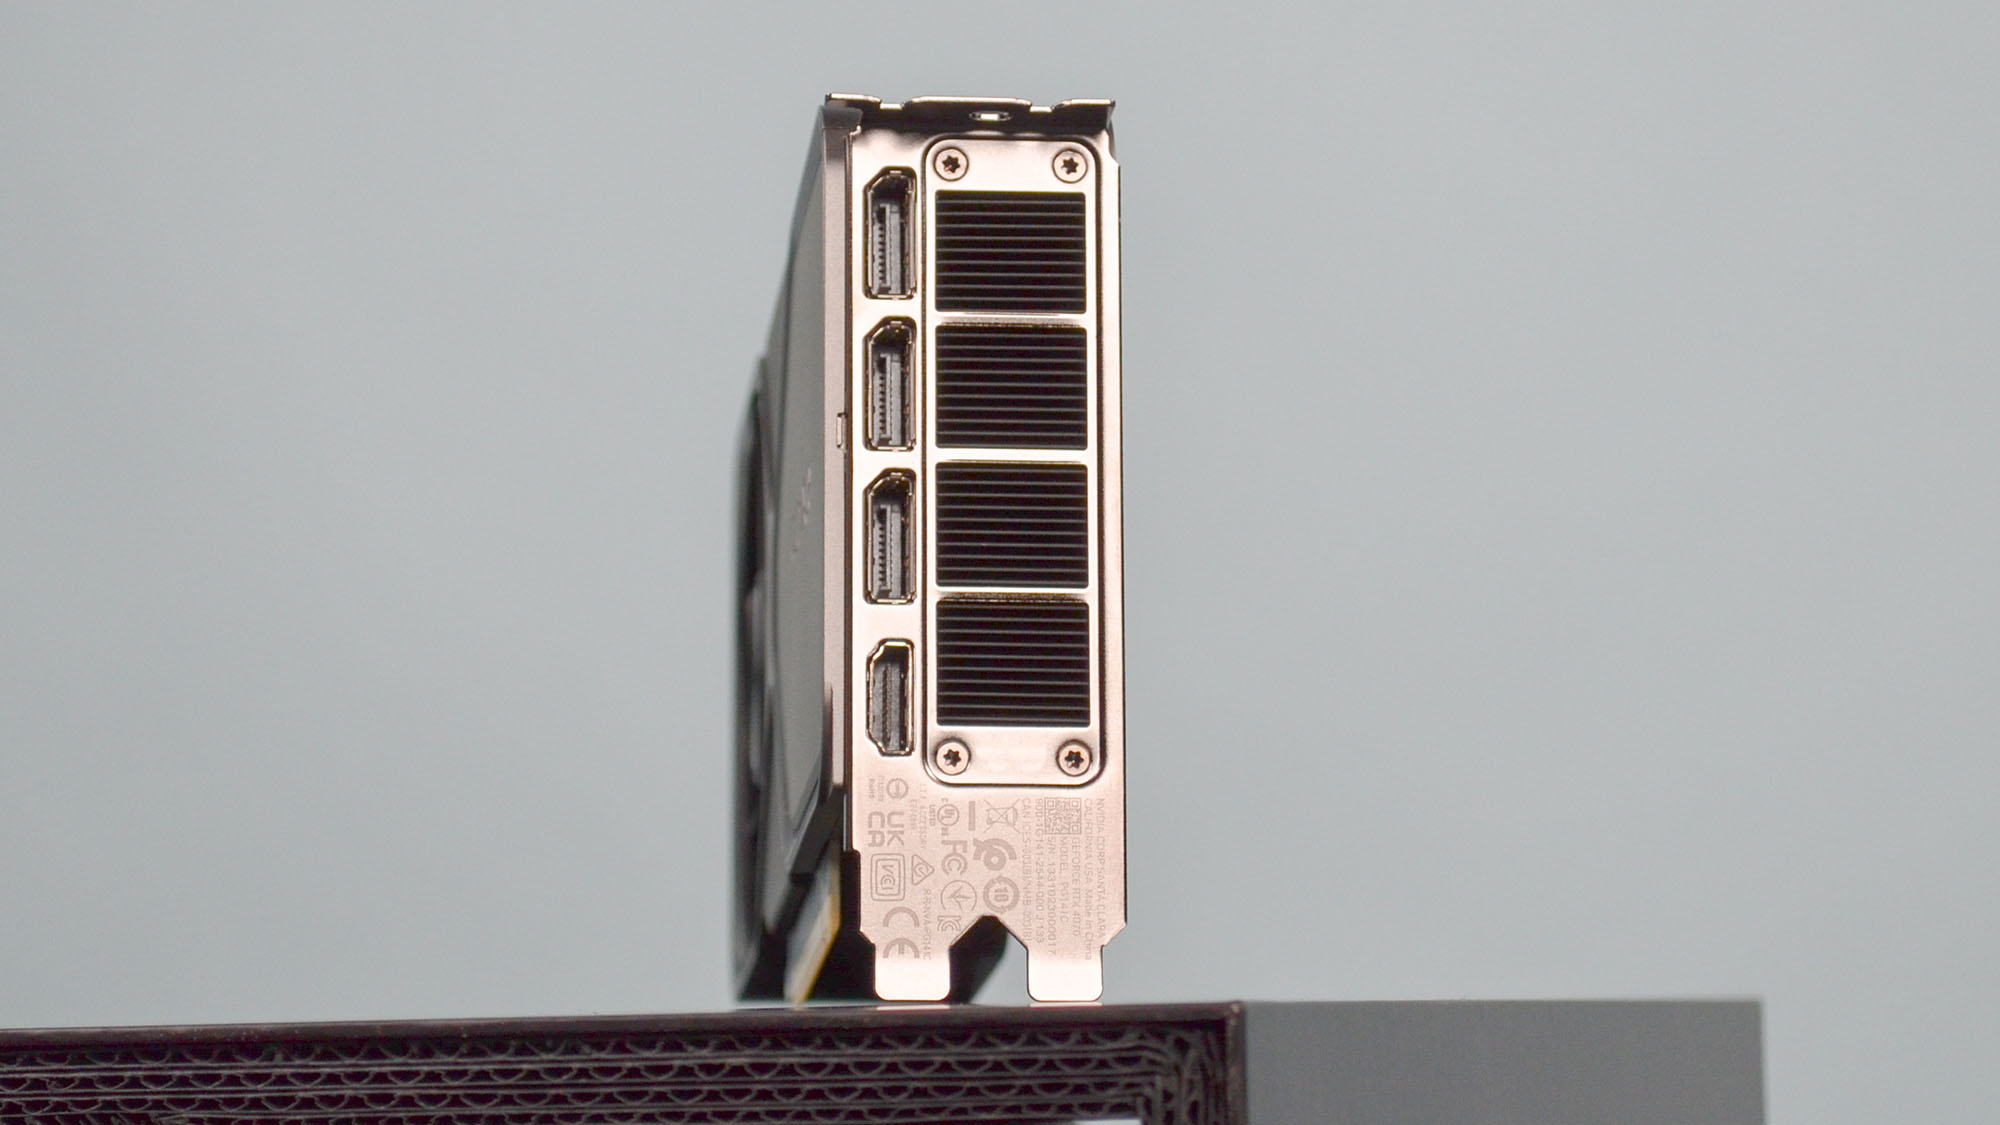 The output ports of an Nvidia GeForce RTX 4070 graphics card